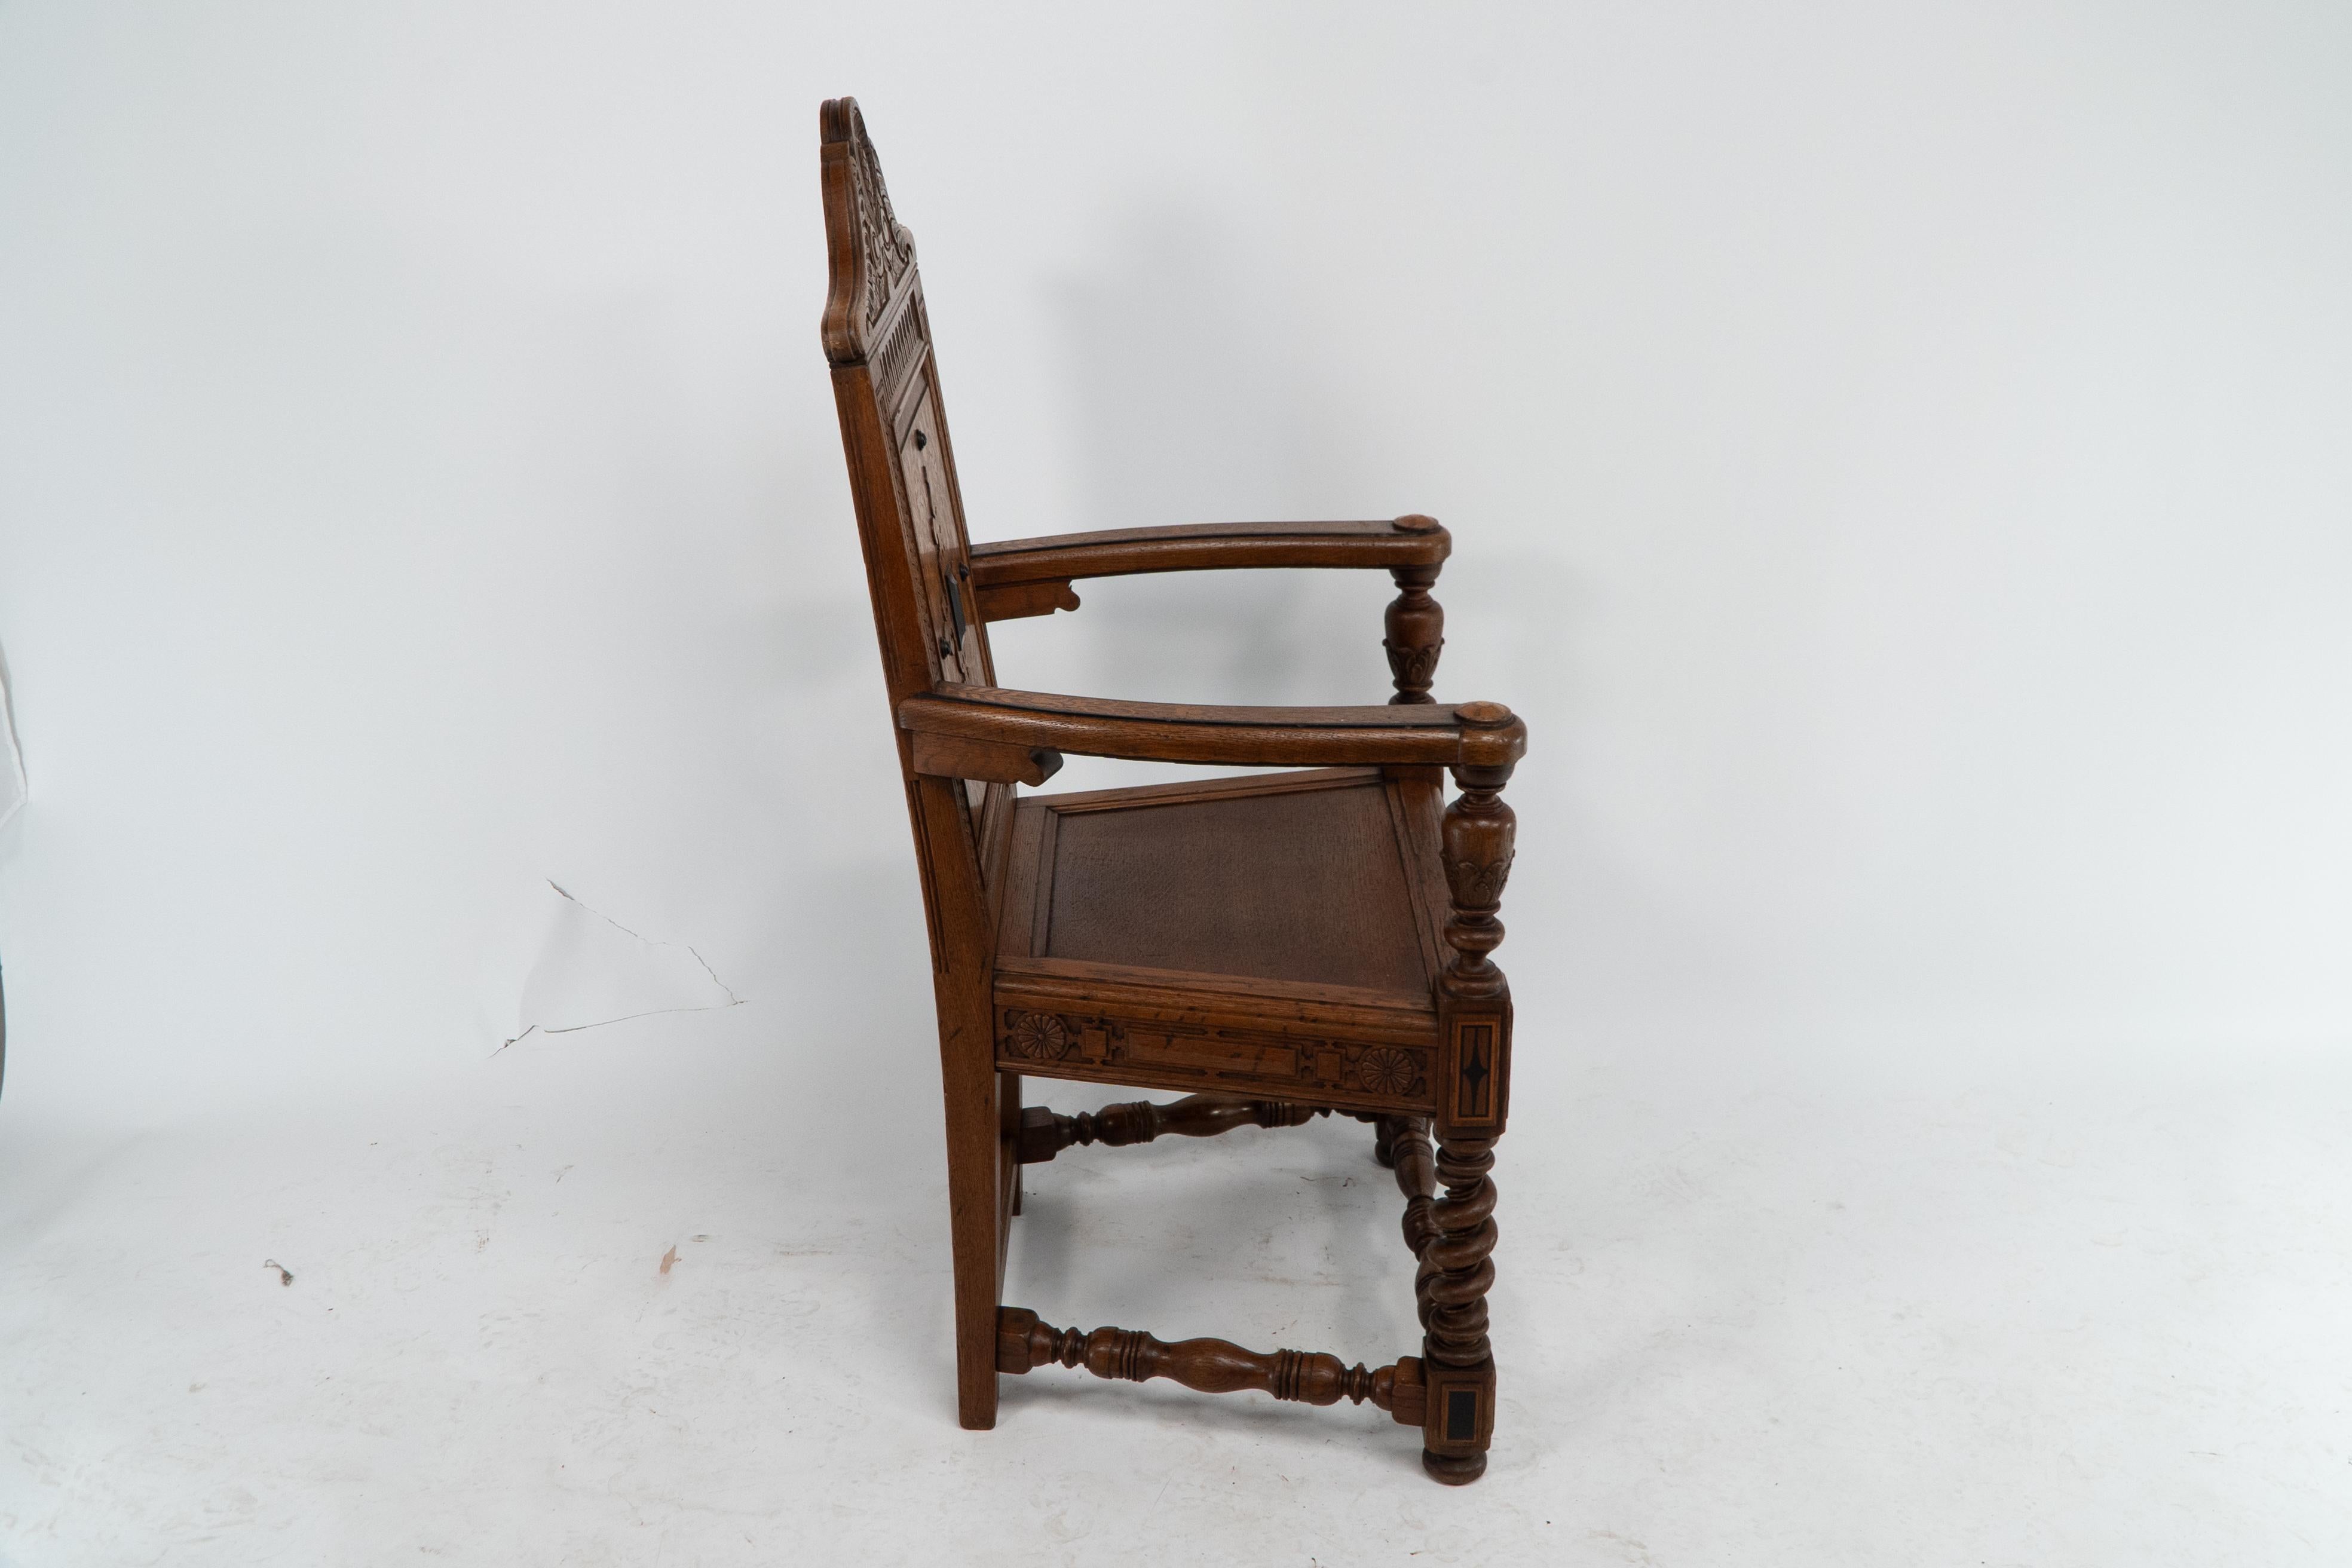 E.W. Godwin attributed, probably made by William Watt. 
An Aesthetic Movement Shakespeare armchair with marquetry and carved decoration. The overall form of this Shakespeare armchair conforms with the drawing and armchair designed by Godwin and made